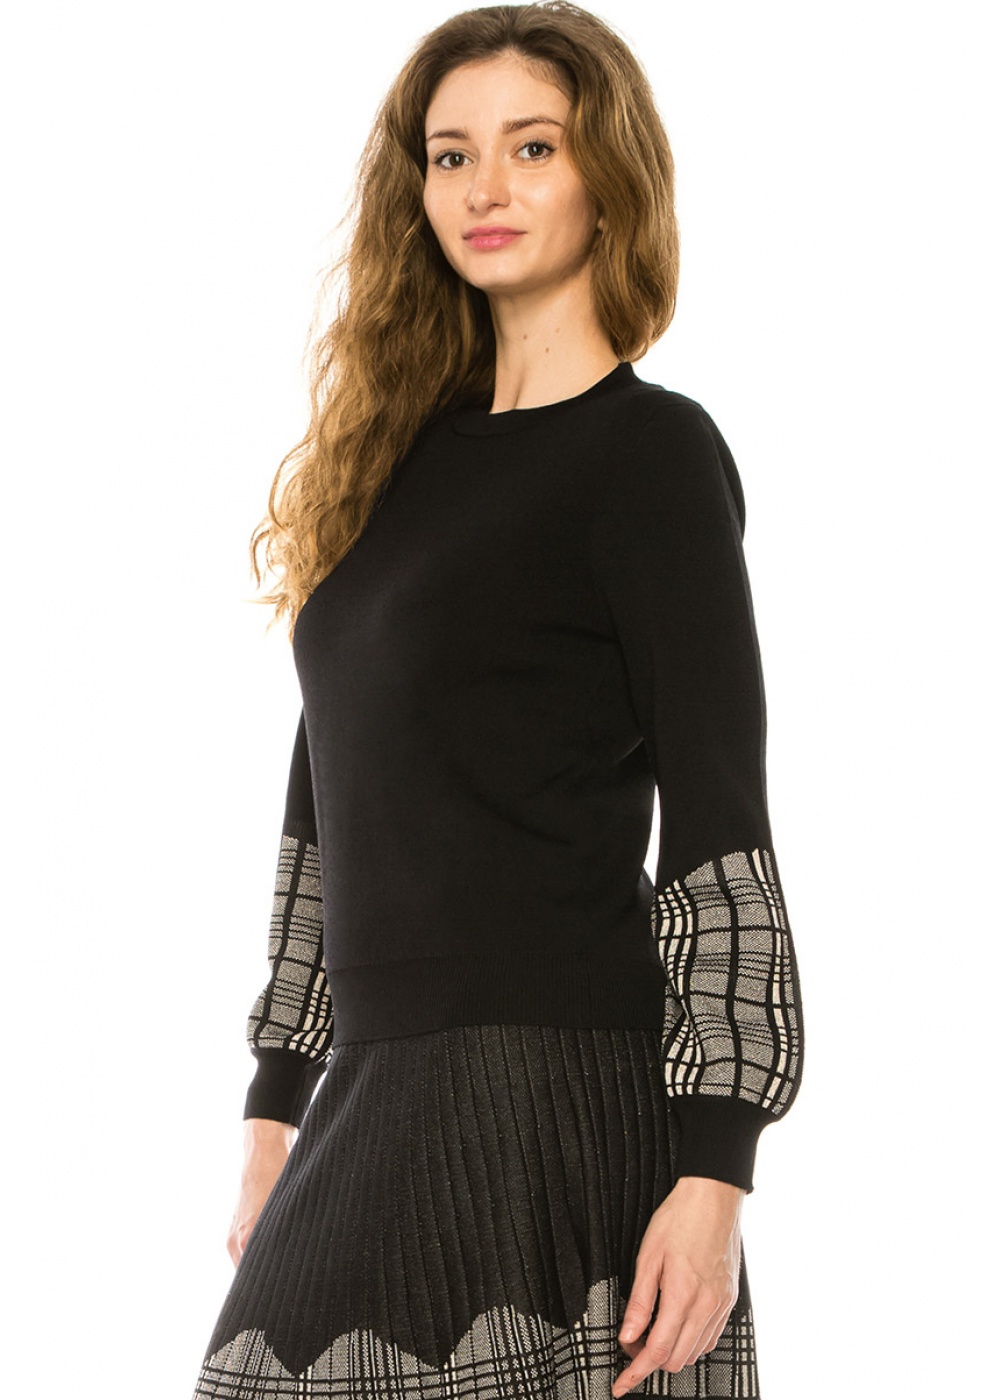 Black Sweater With Checkered Accents